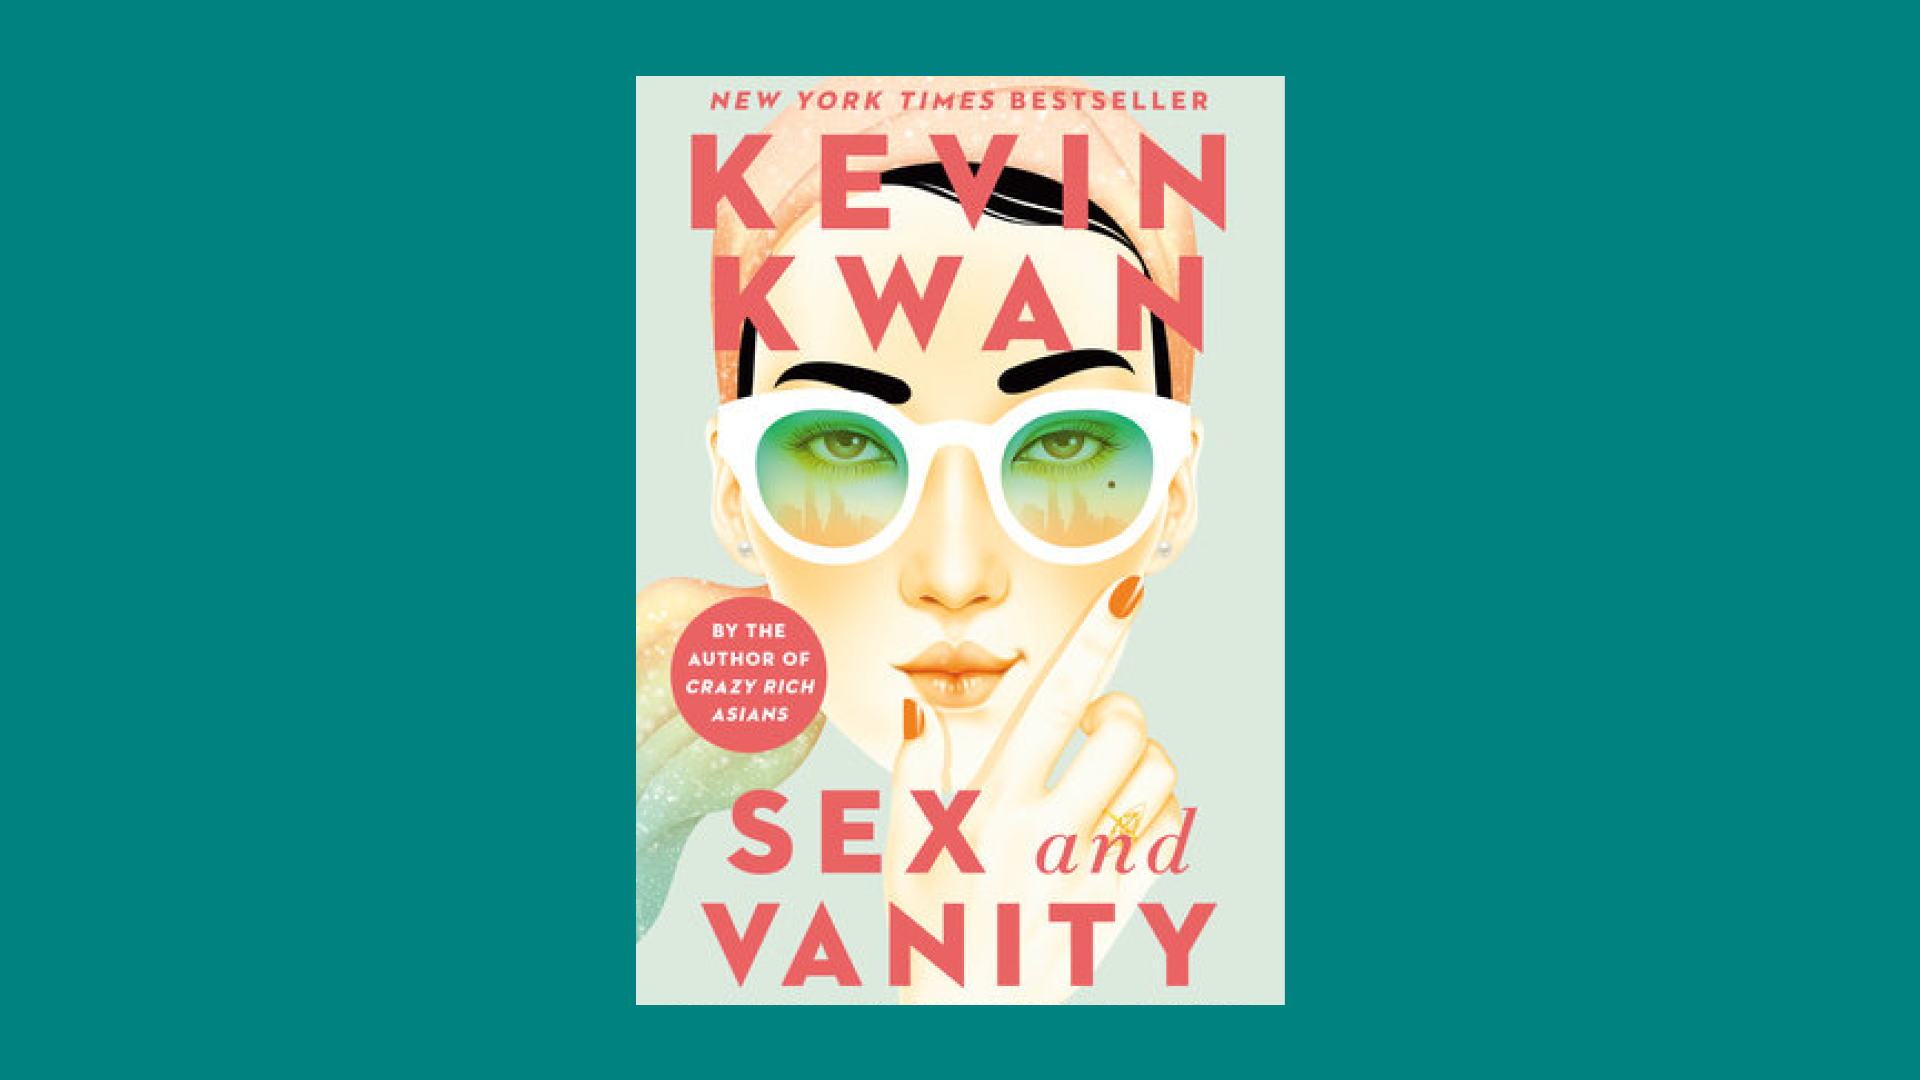 "Sex and Vanity” by Kevin Kwan